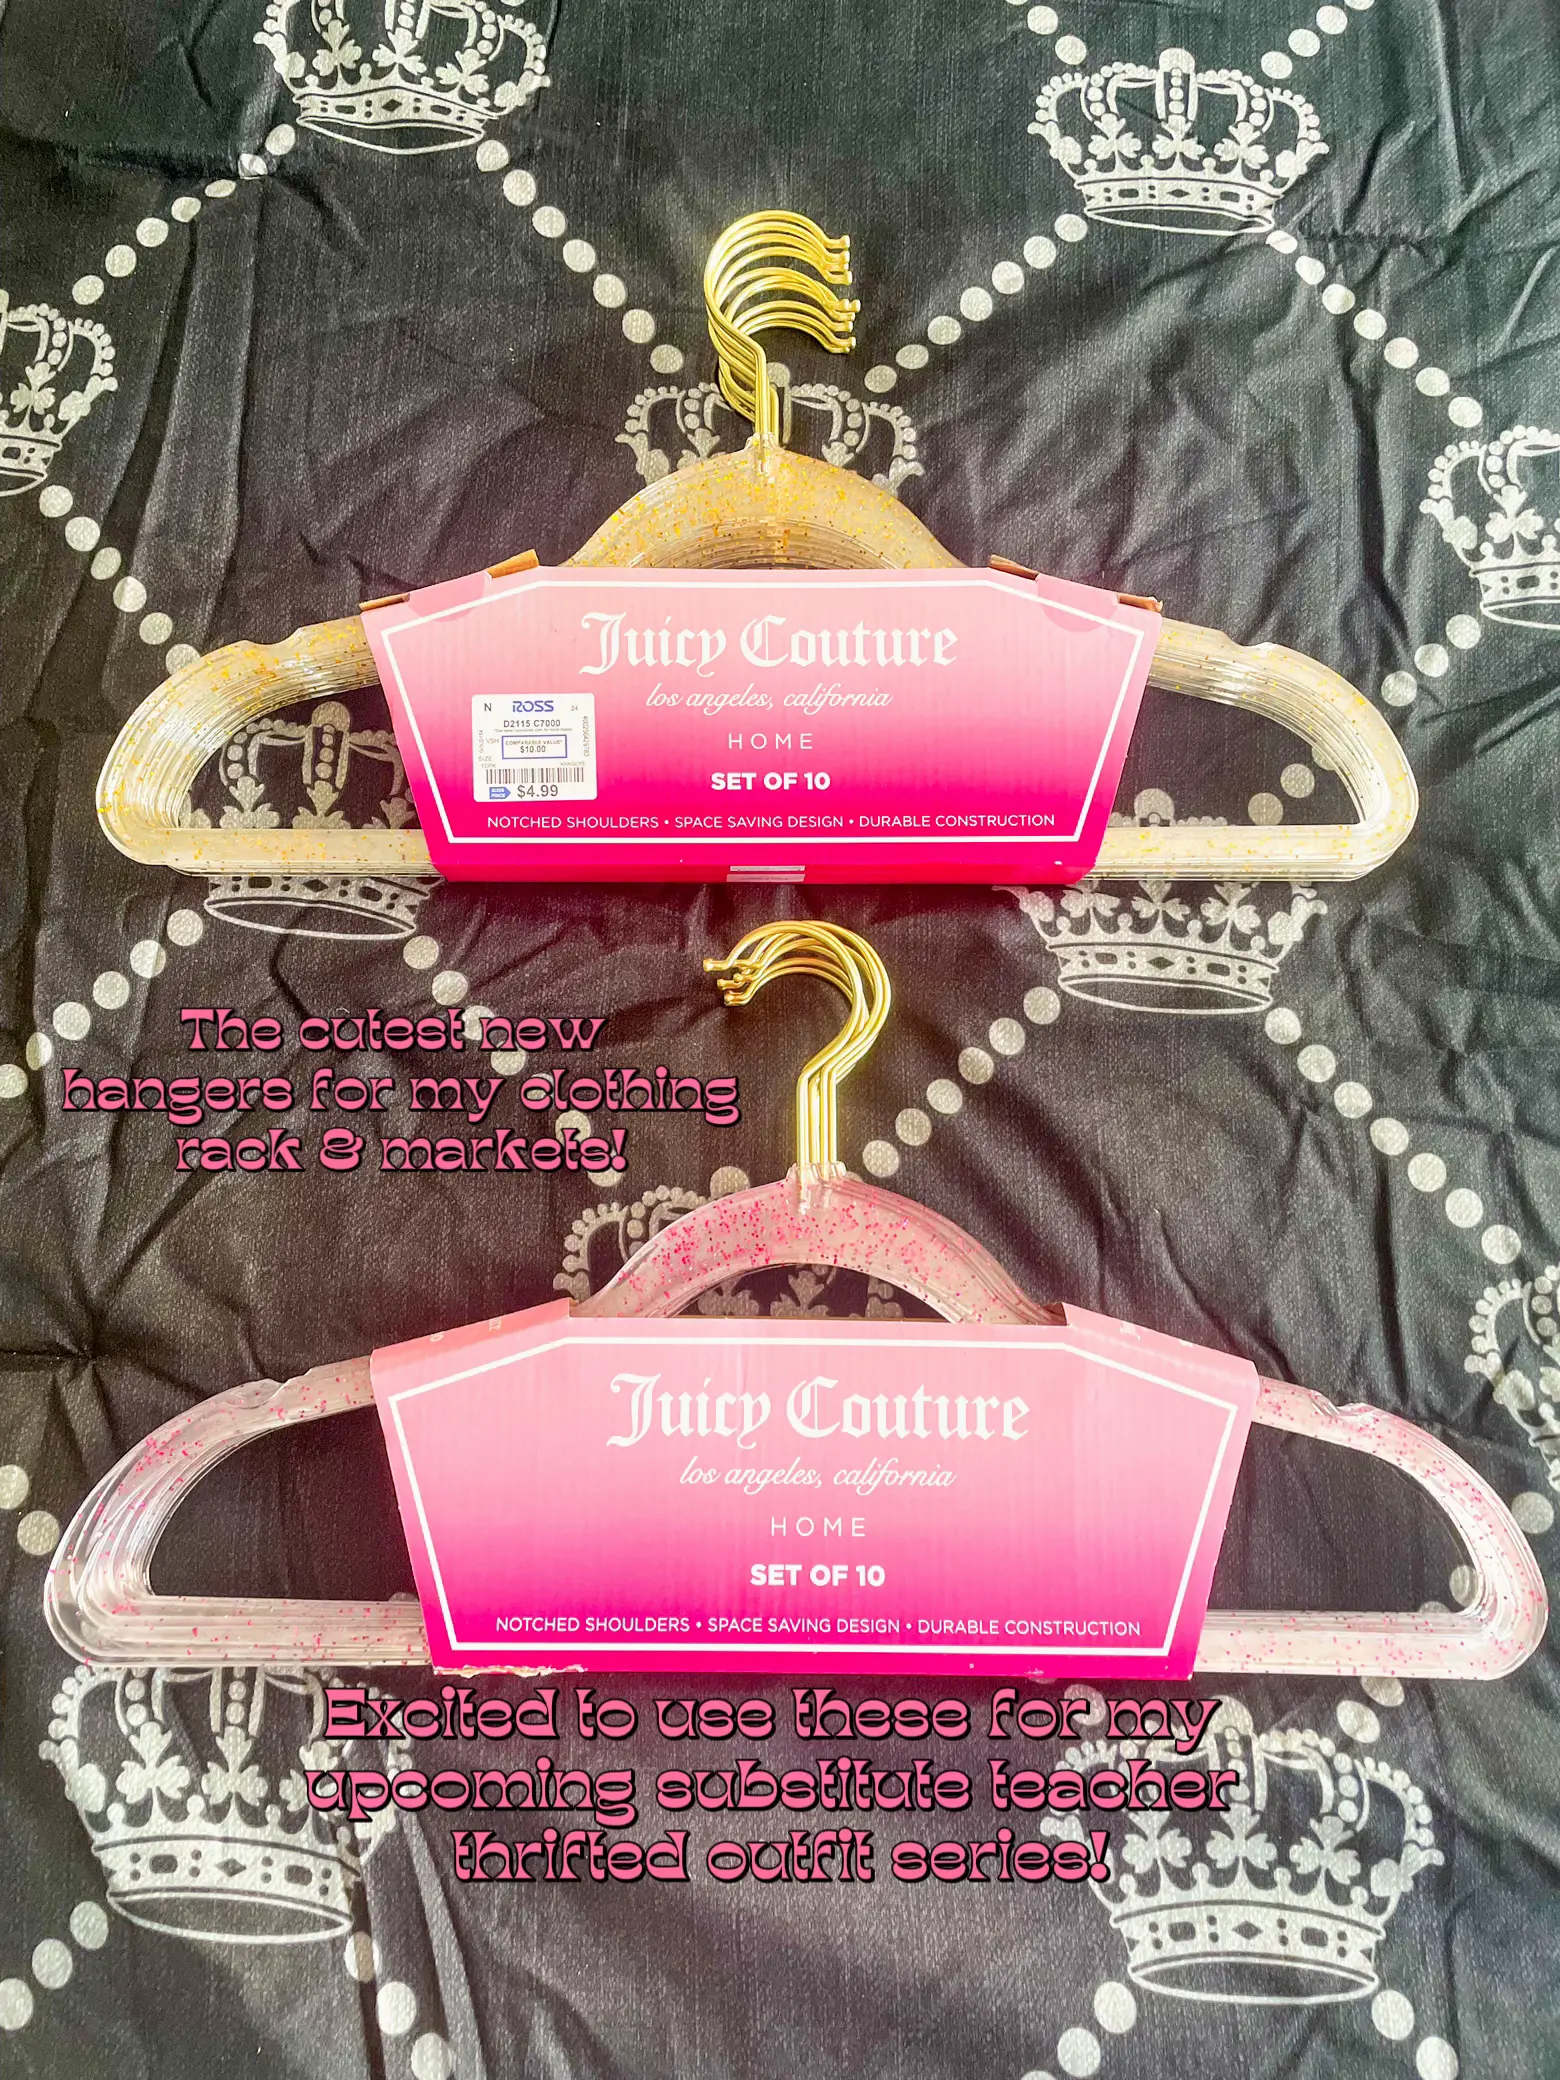 SHOP WITH ME AT ROSS FOR JUICY COUTURE HOME DECOR!